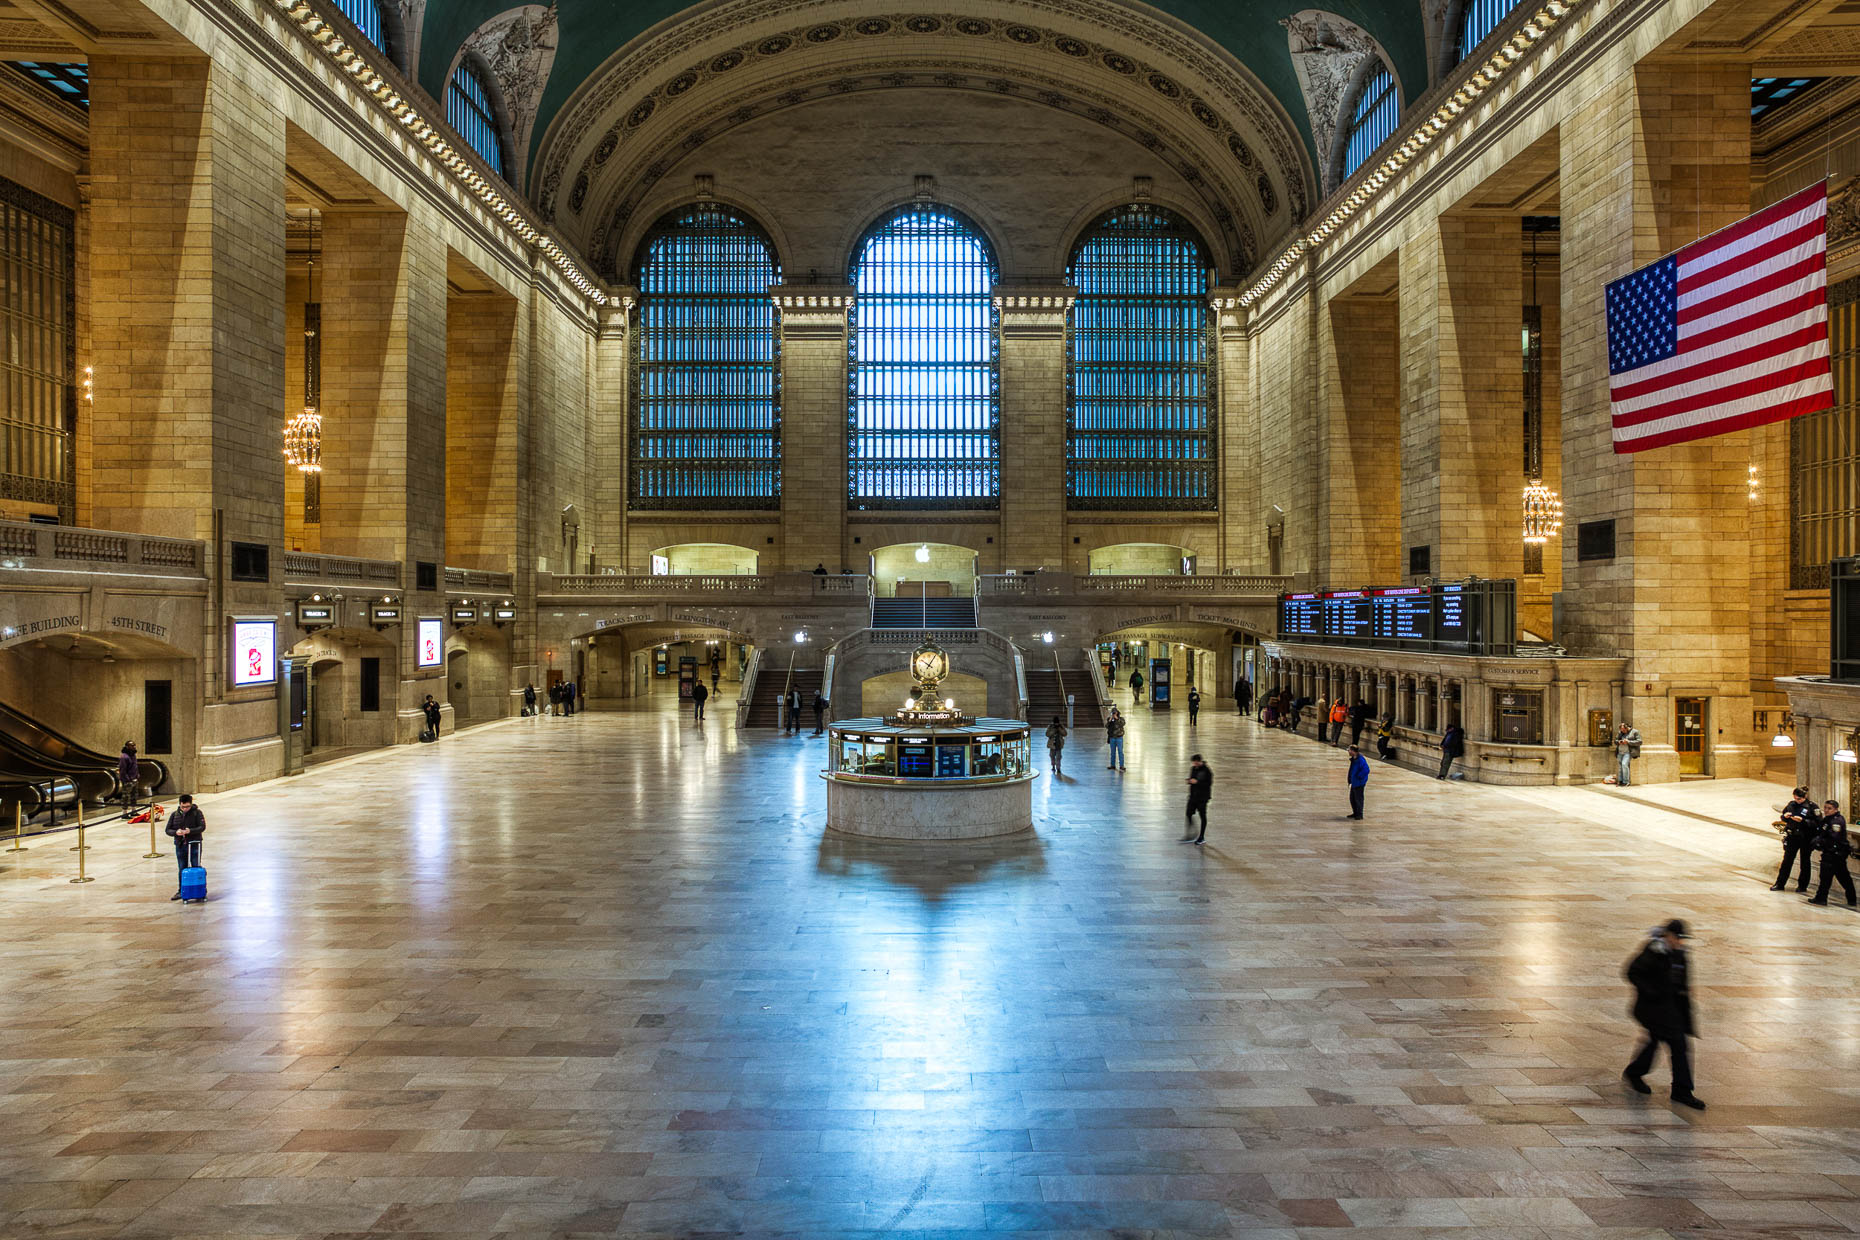 The nearly empty Grand Central Terminal of New York City because of the coronavirus pandemic.